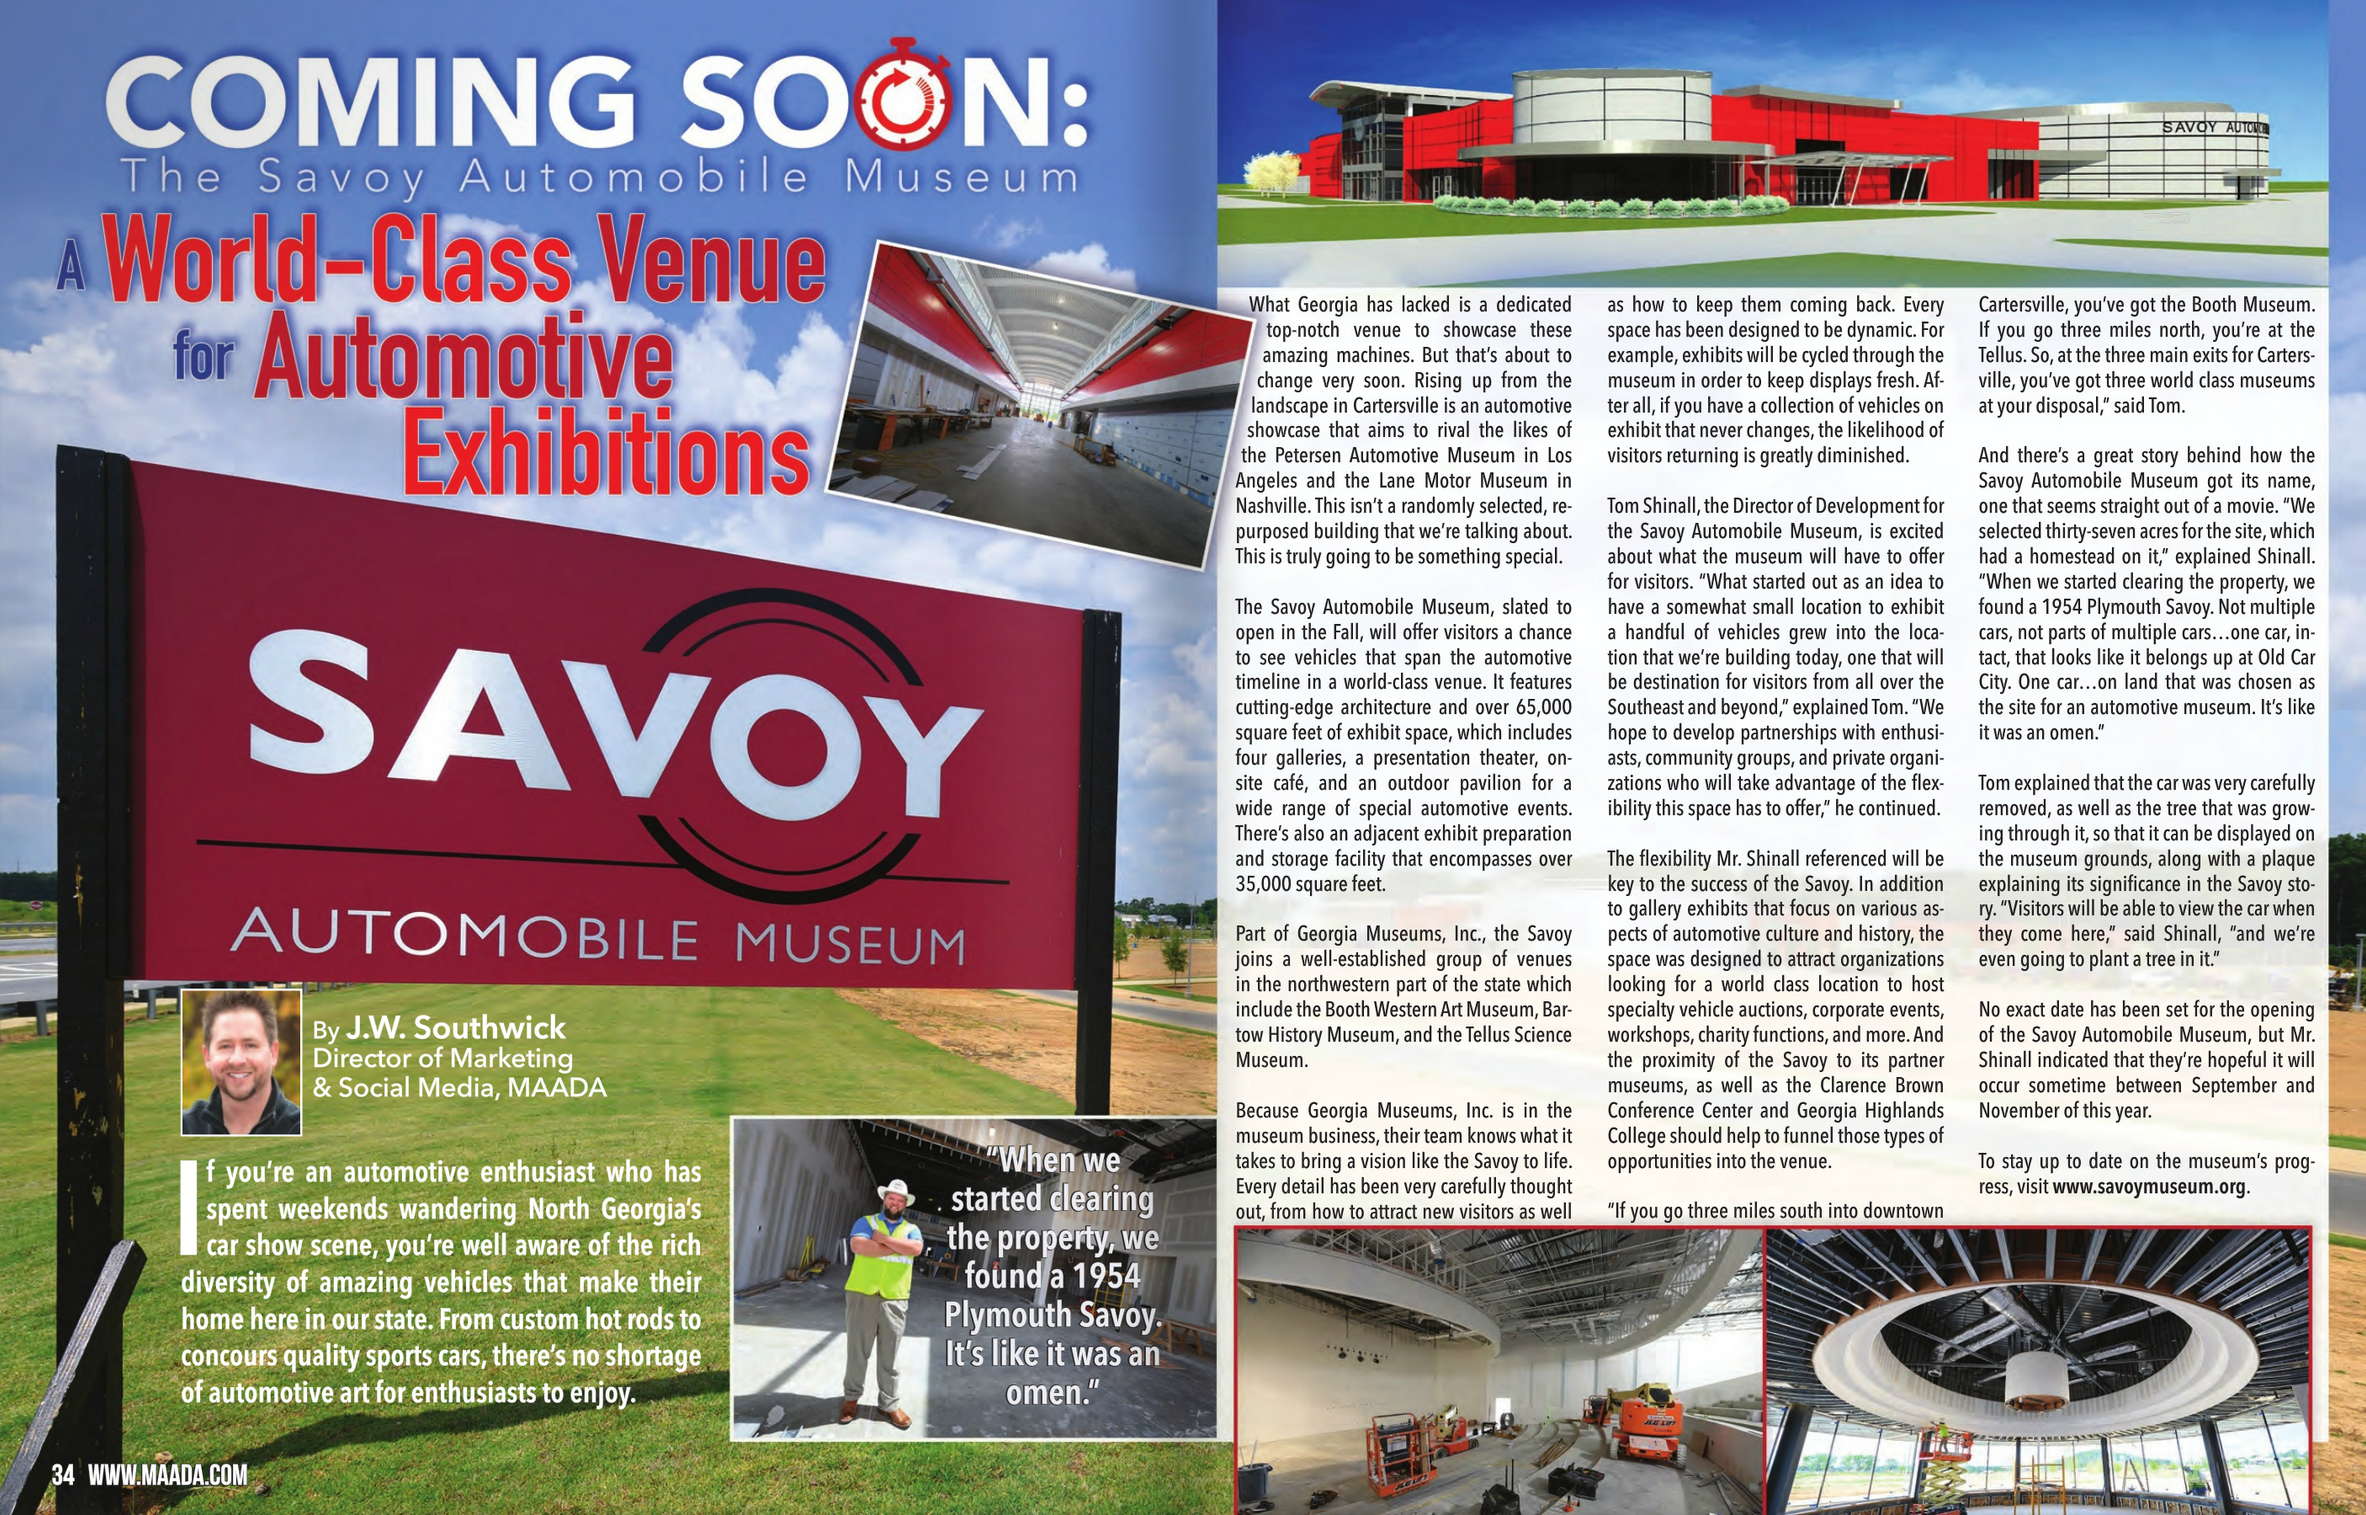 Savoy Automobile Museum featured in On the Move Magazine